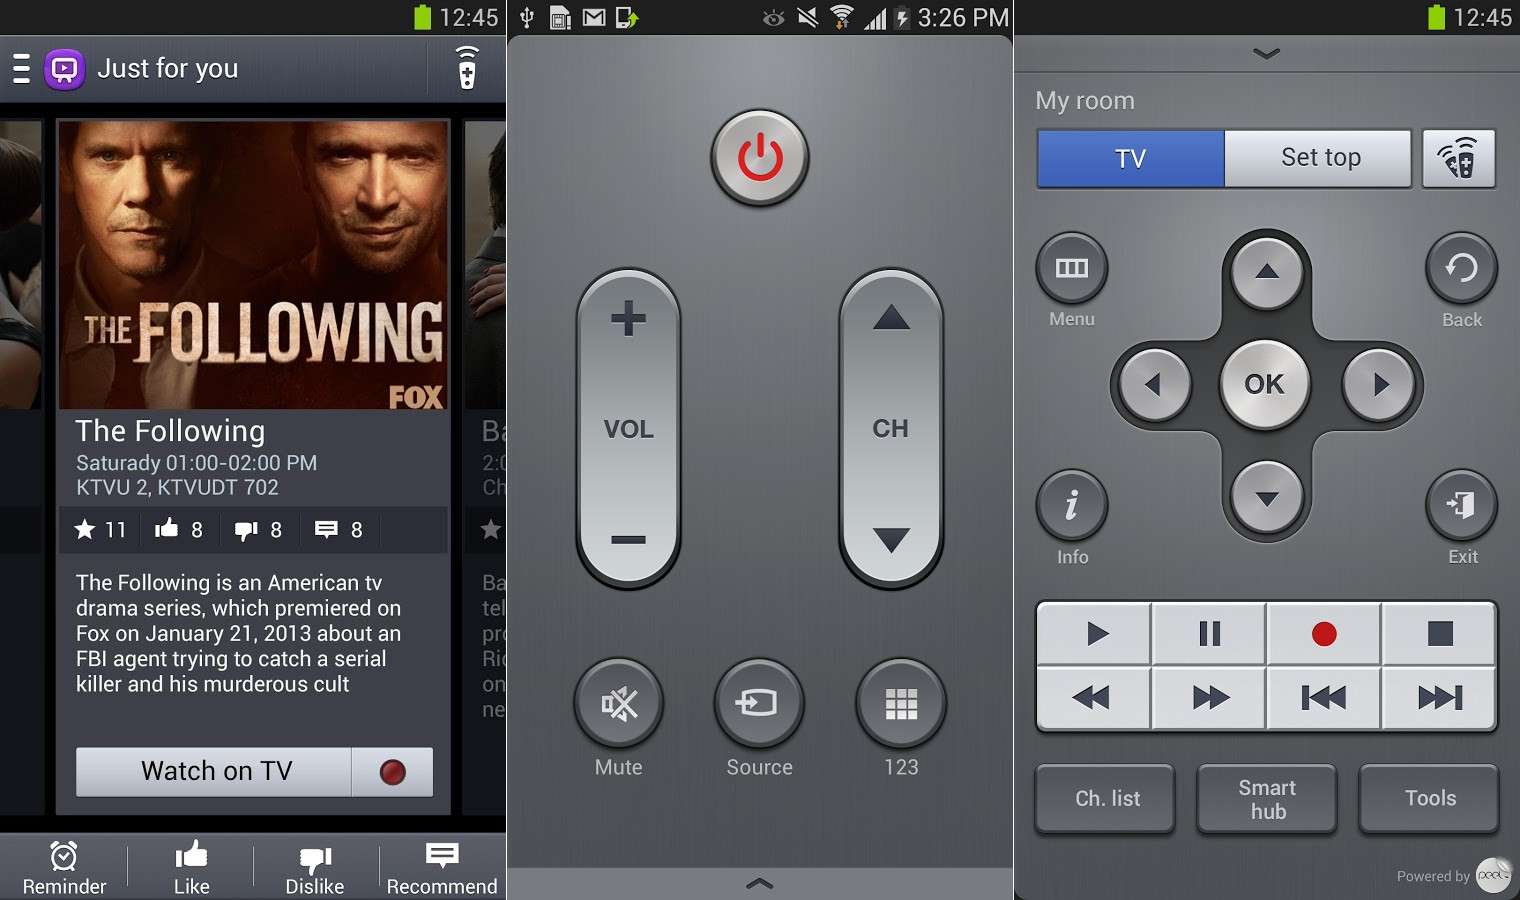 An incredible Living Room experience with Samsung WatchON - (Courtesy - www.sammobile.com)